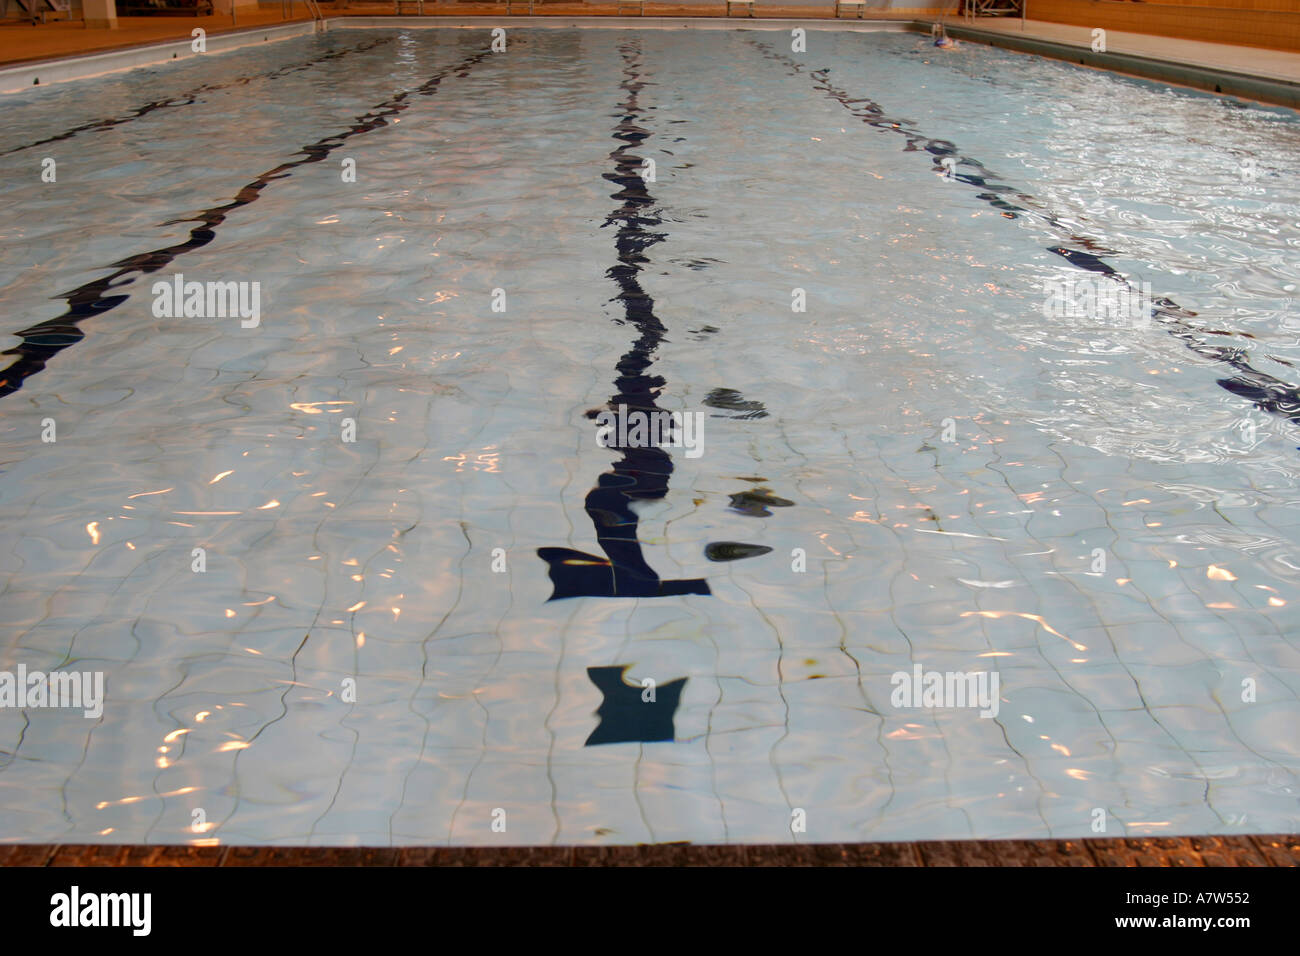 Piscina Welsh Institute of Sport Cardiff South Glamorgan Foto Stock